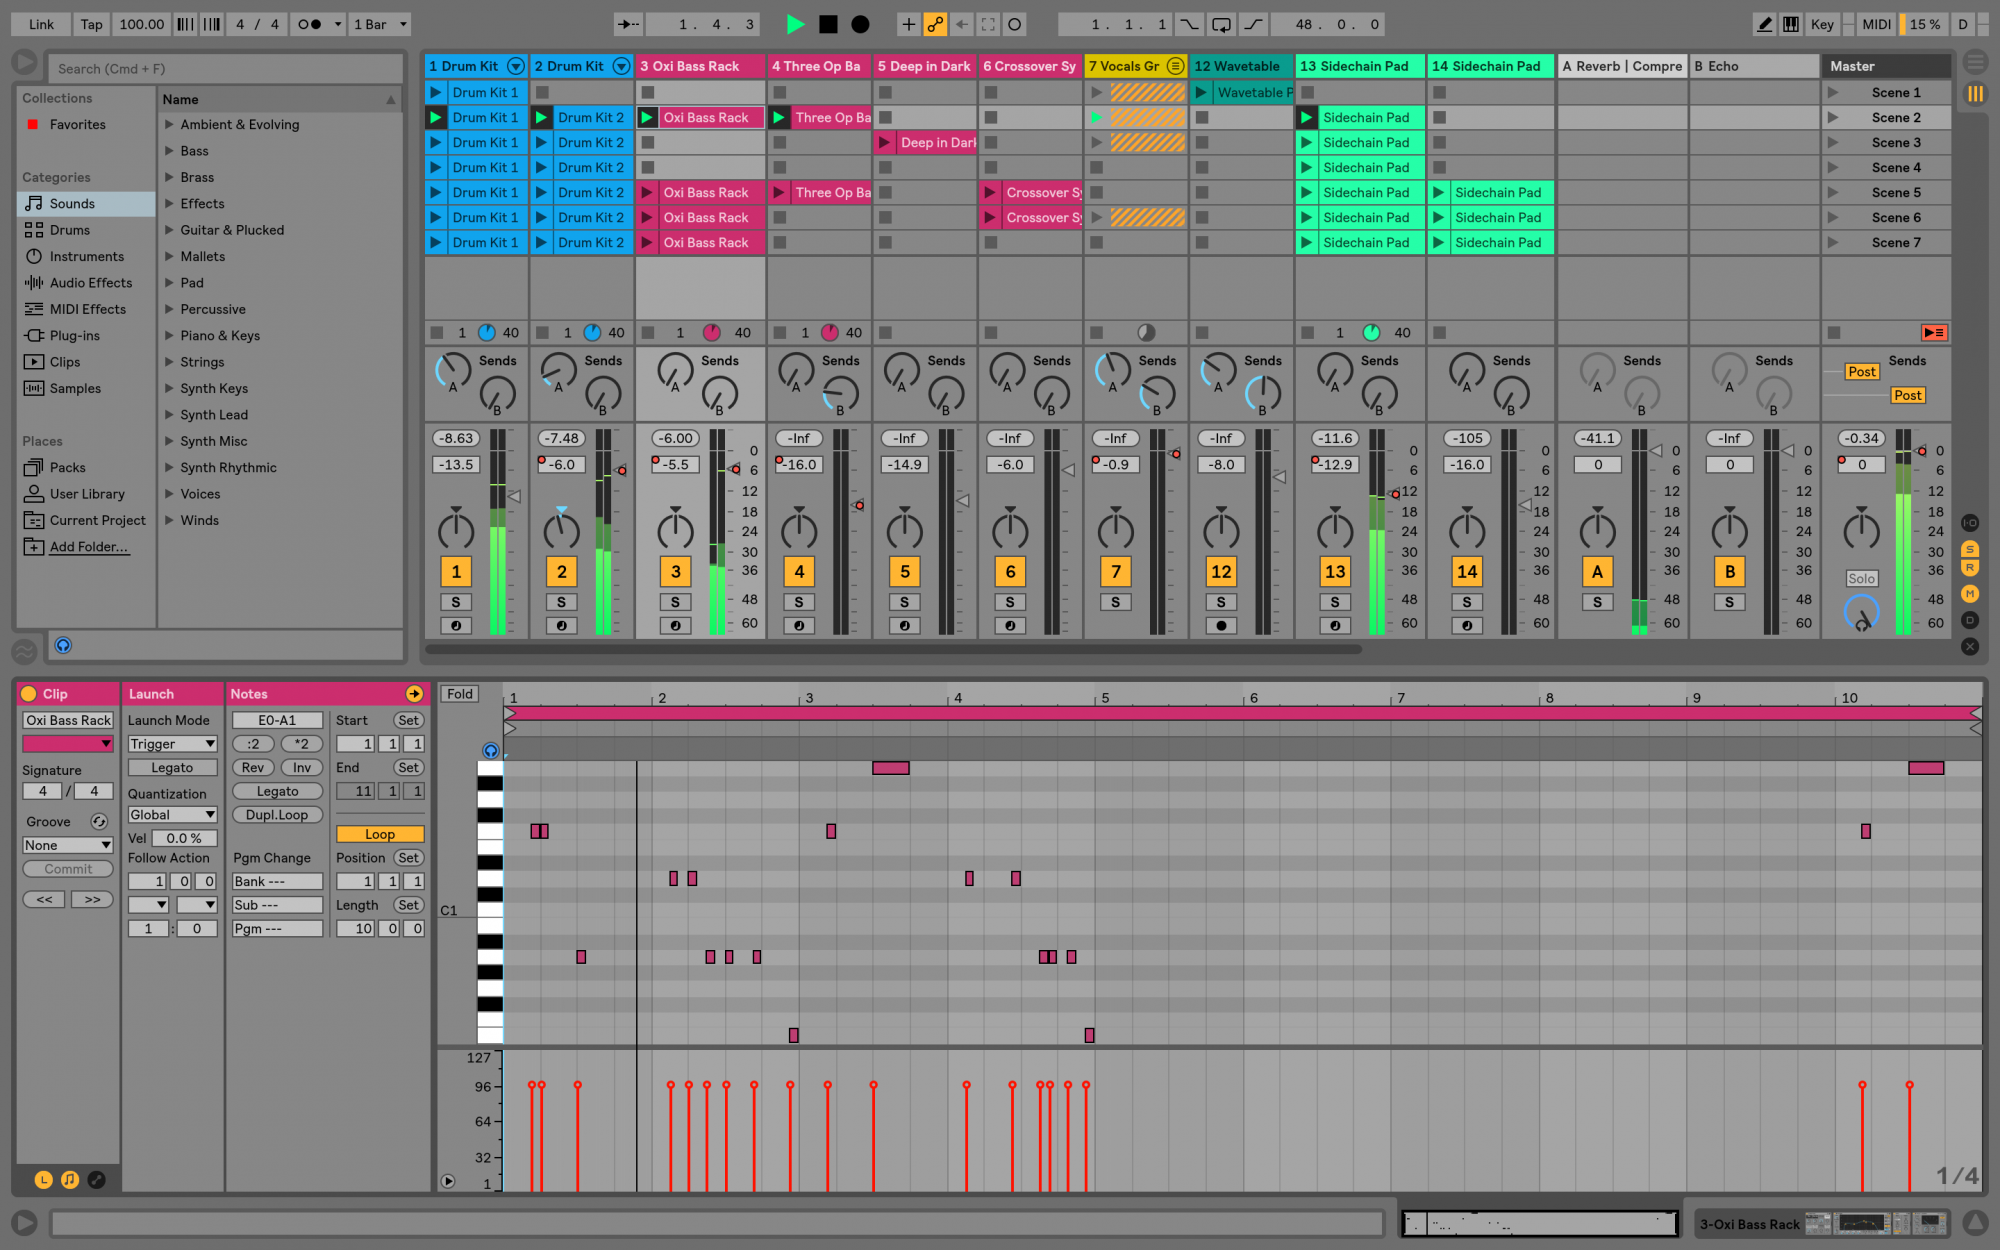 ableton for windows free download